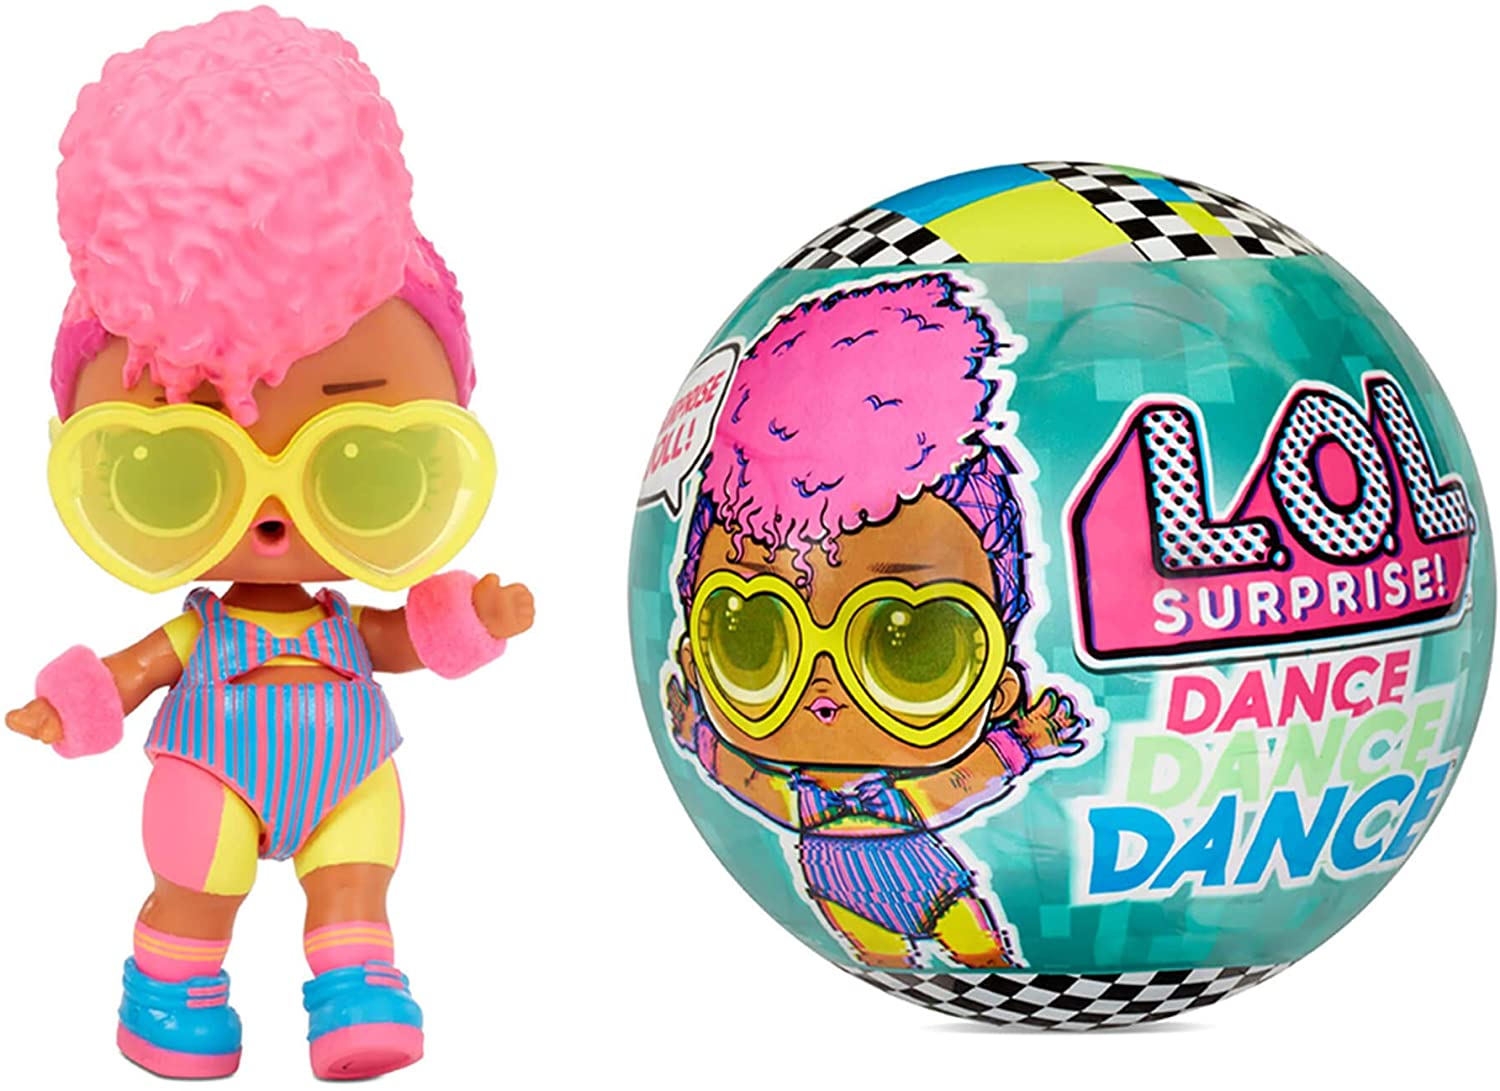 LOL Surprise Dance dolls are up for preorder in UK! - YouLoveIt.com